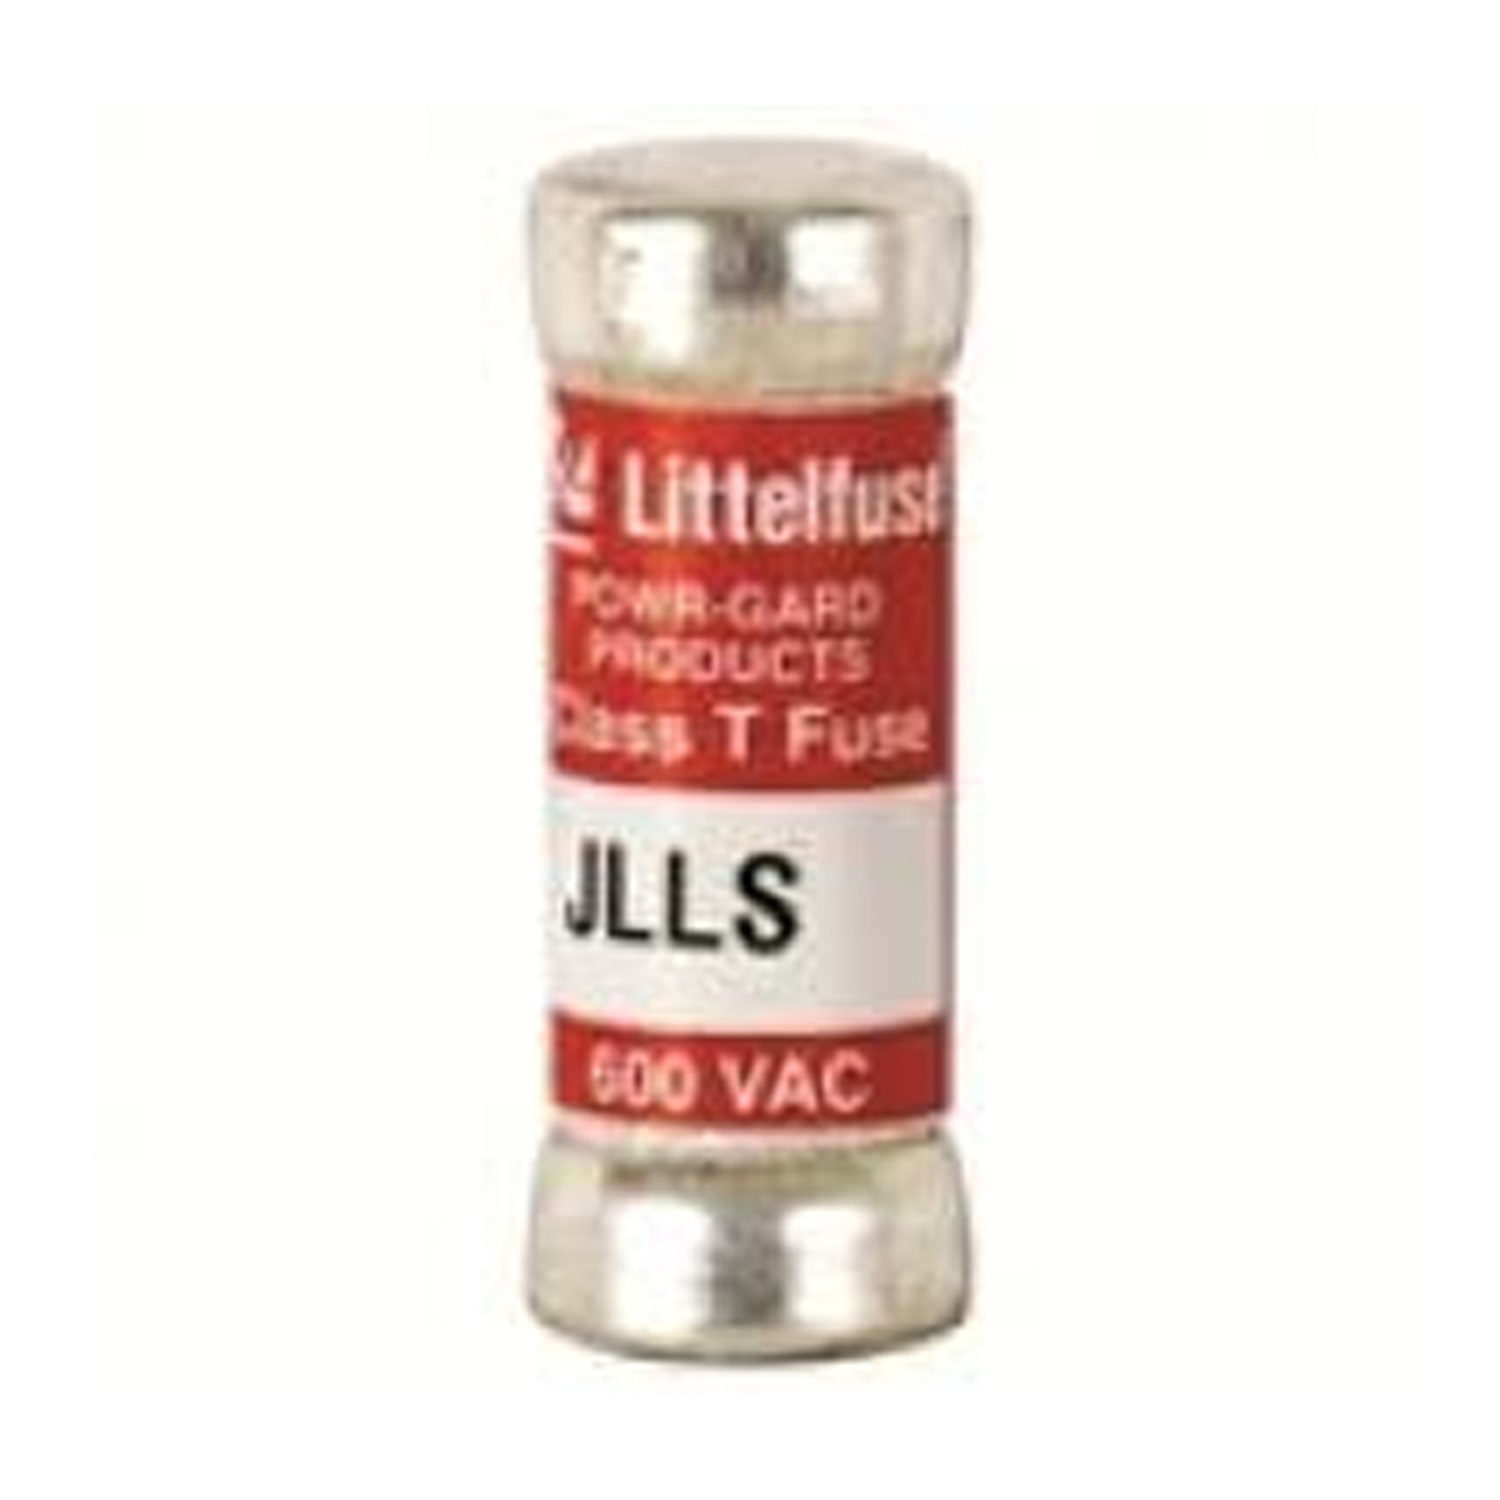 600 Amp 600 VAC JLLS Series Class T Fast Acting Fuse